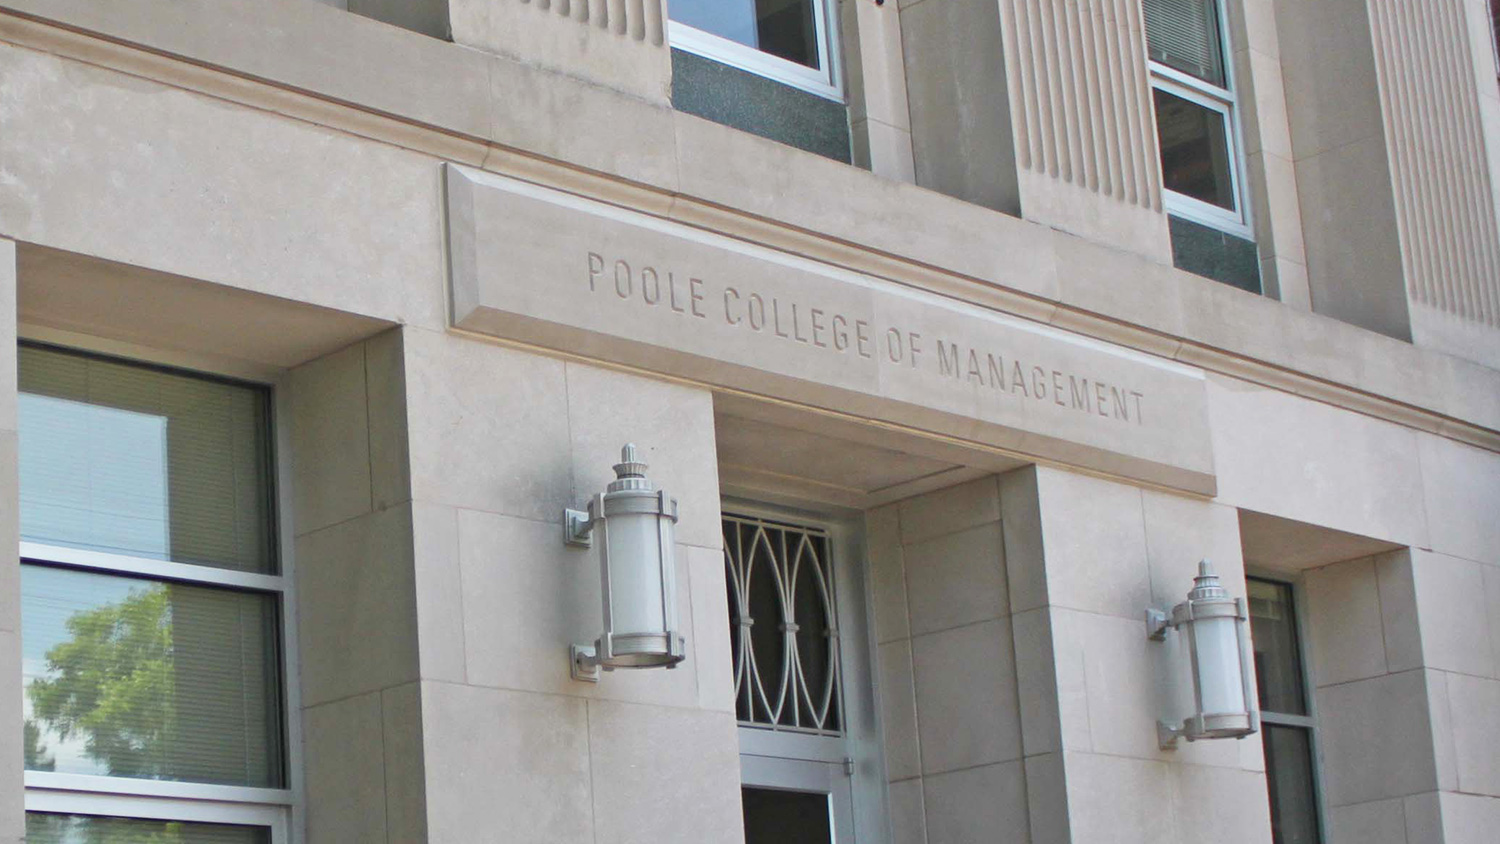 Nelson Hall, home to the NC State Poole College of Management